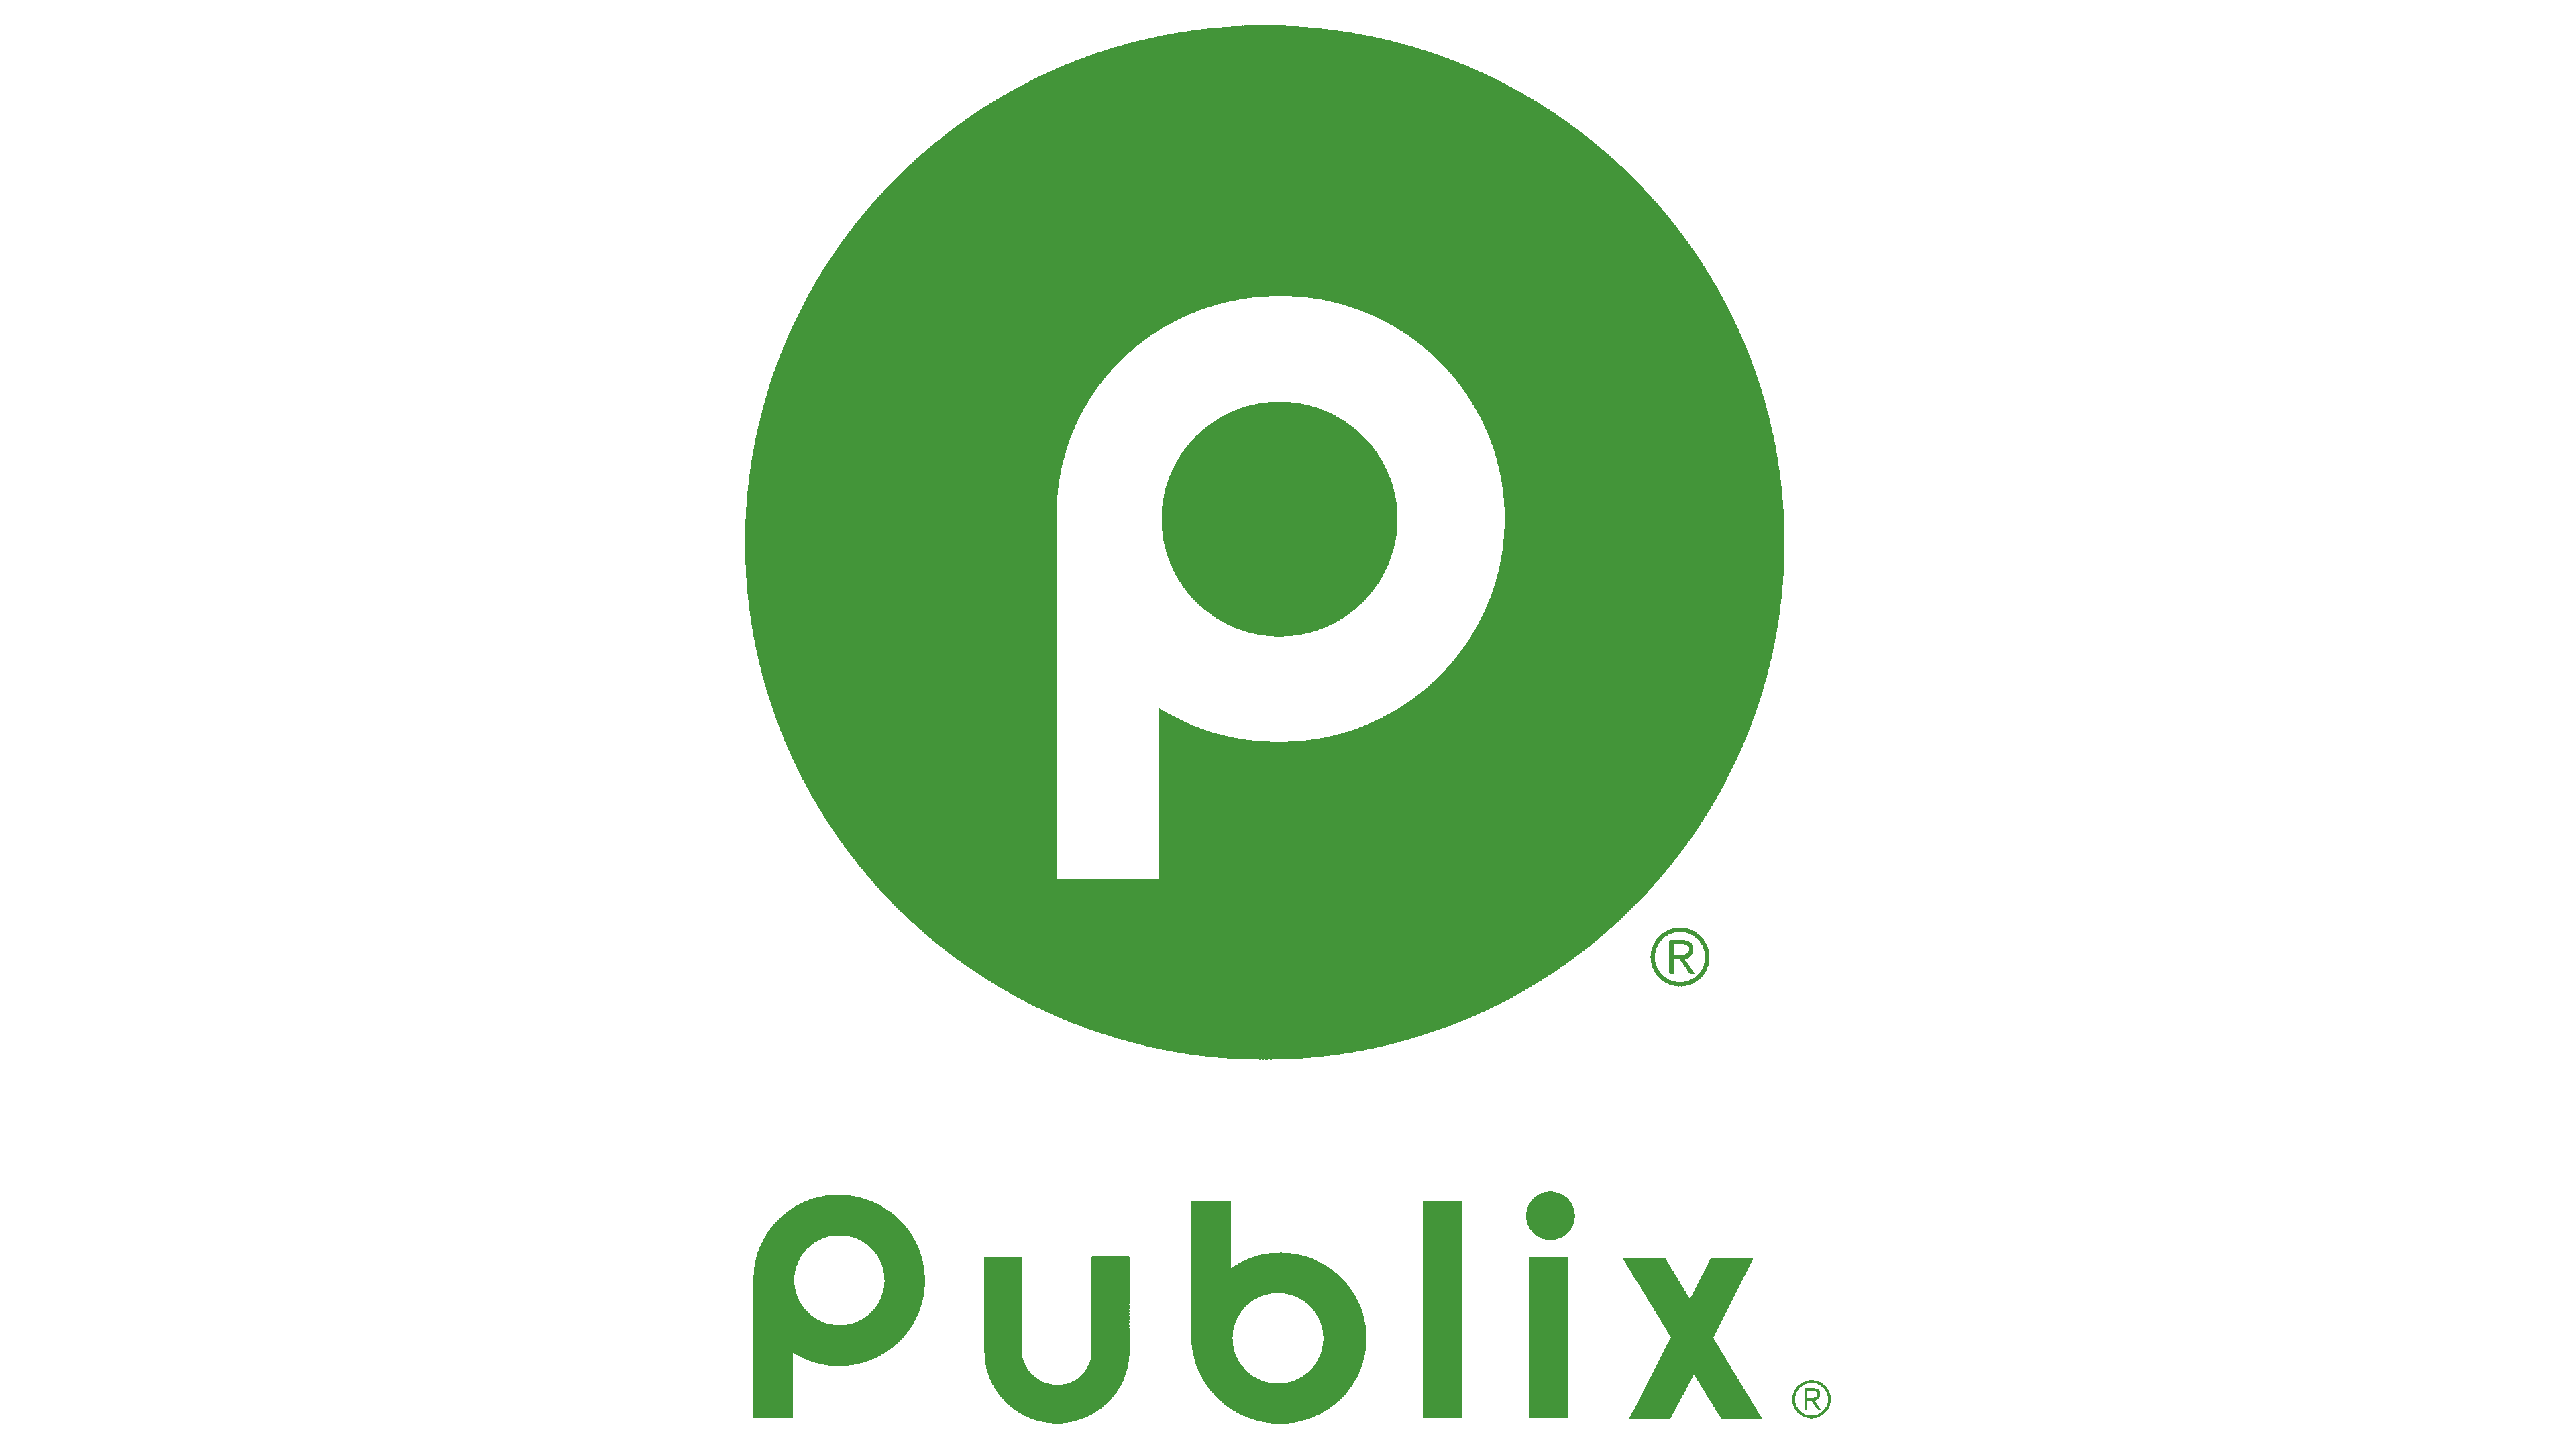 Publix Charlotte Division Vice President to Retire; New President Announced